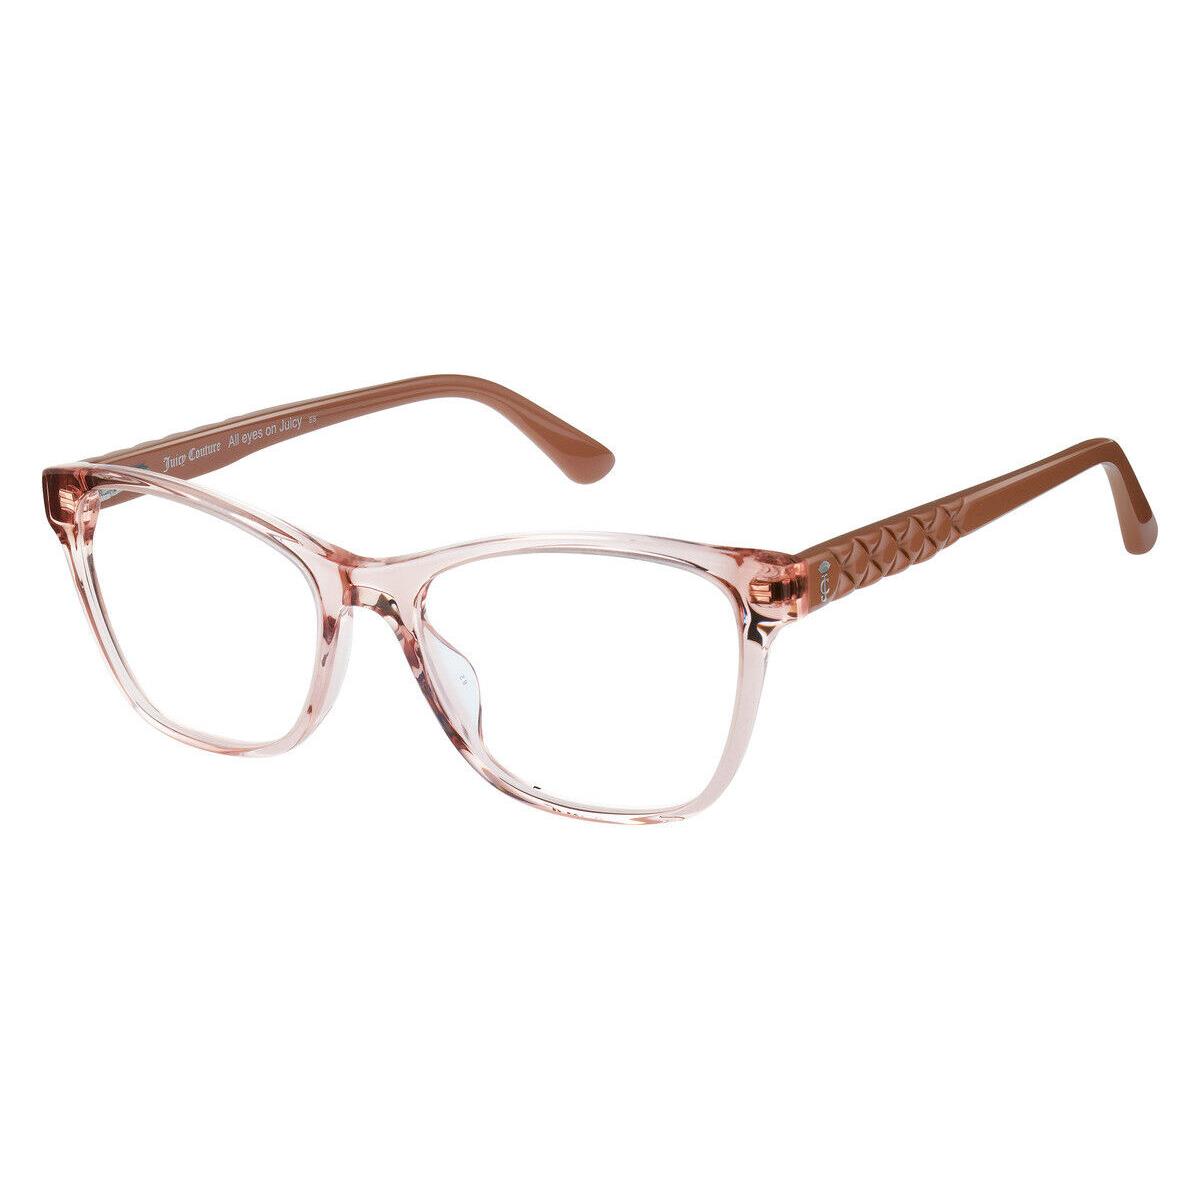 Juicy Couture 185 Eyeglasses RX Women Rectangle 52mm